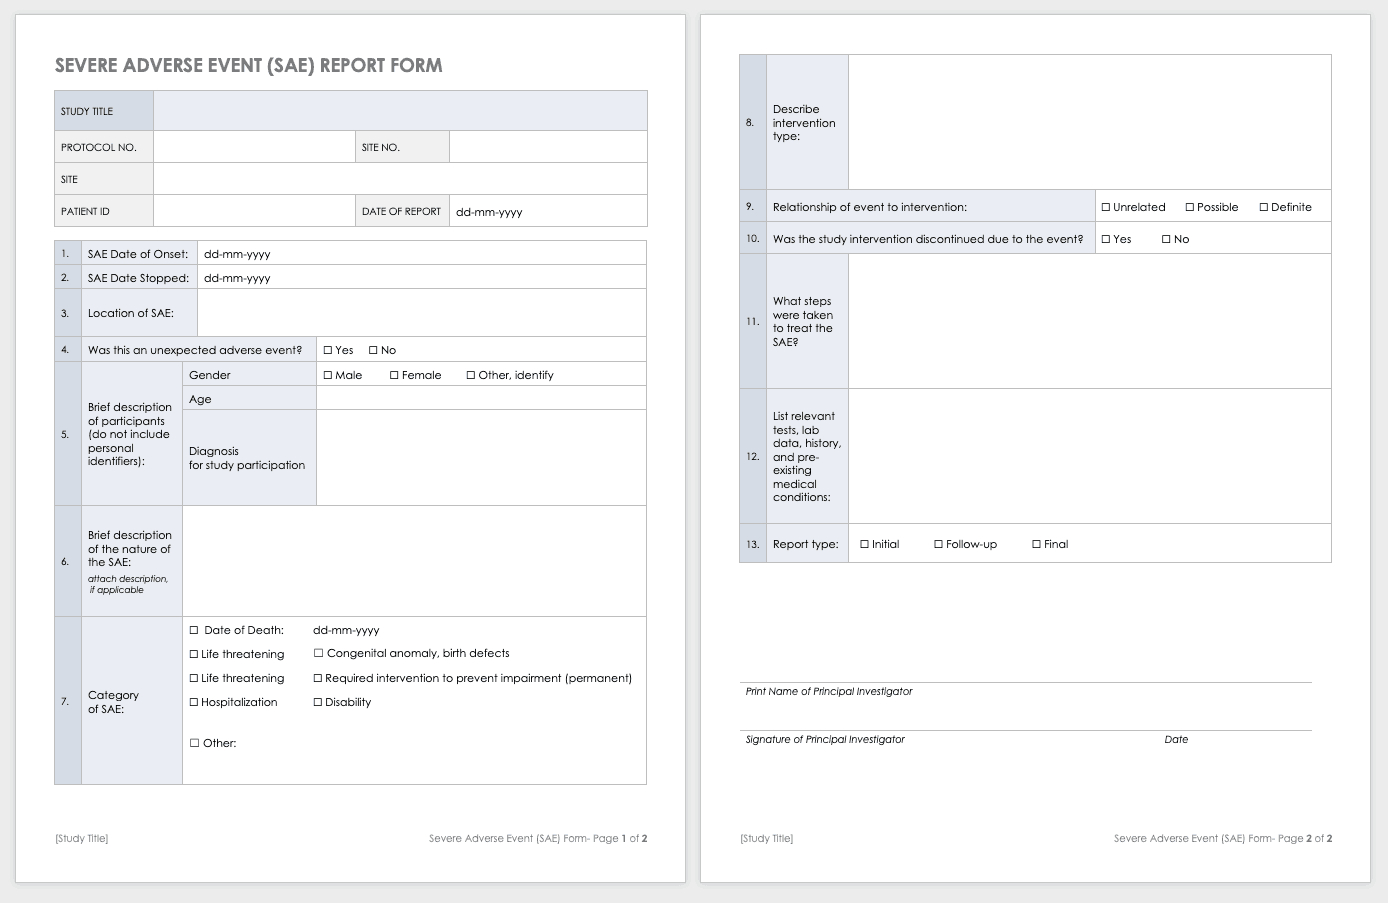 Free Clinical Trial Templates | Smartsheet With Regard To Clinical Trial Report Template